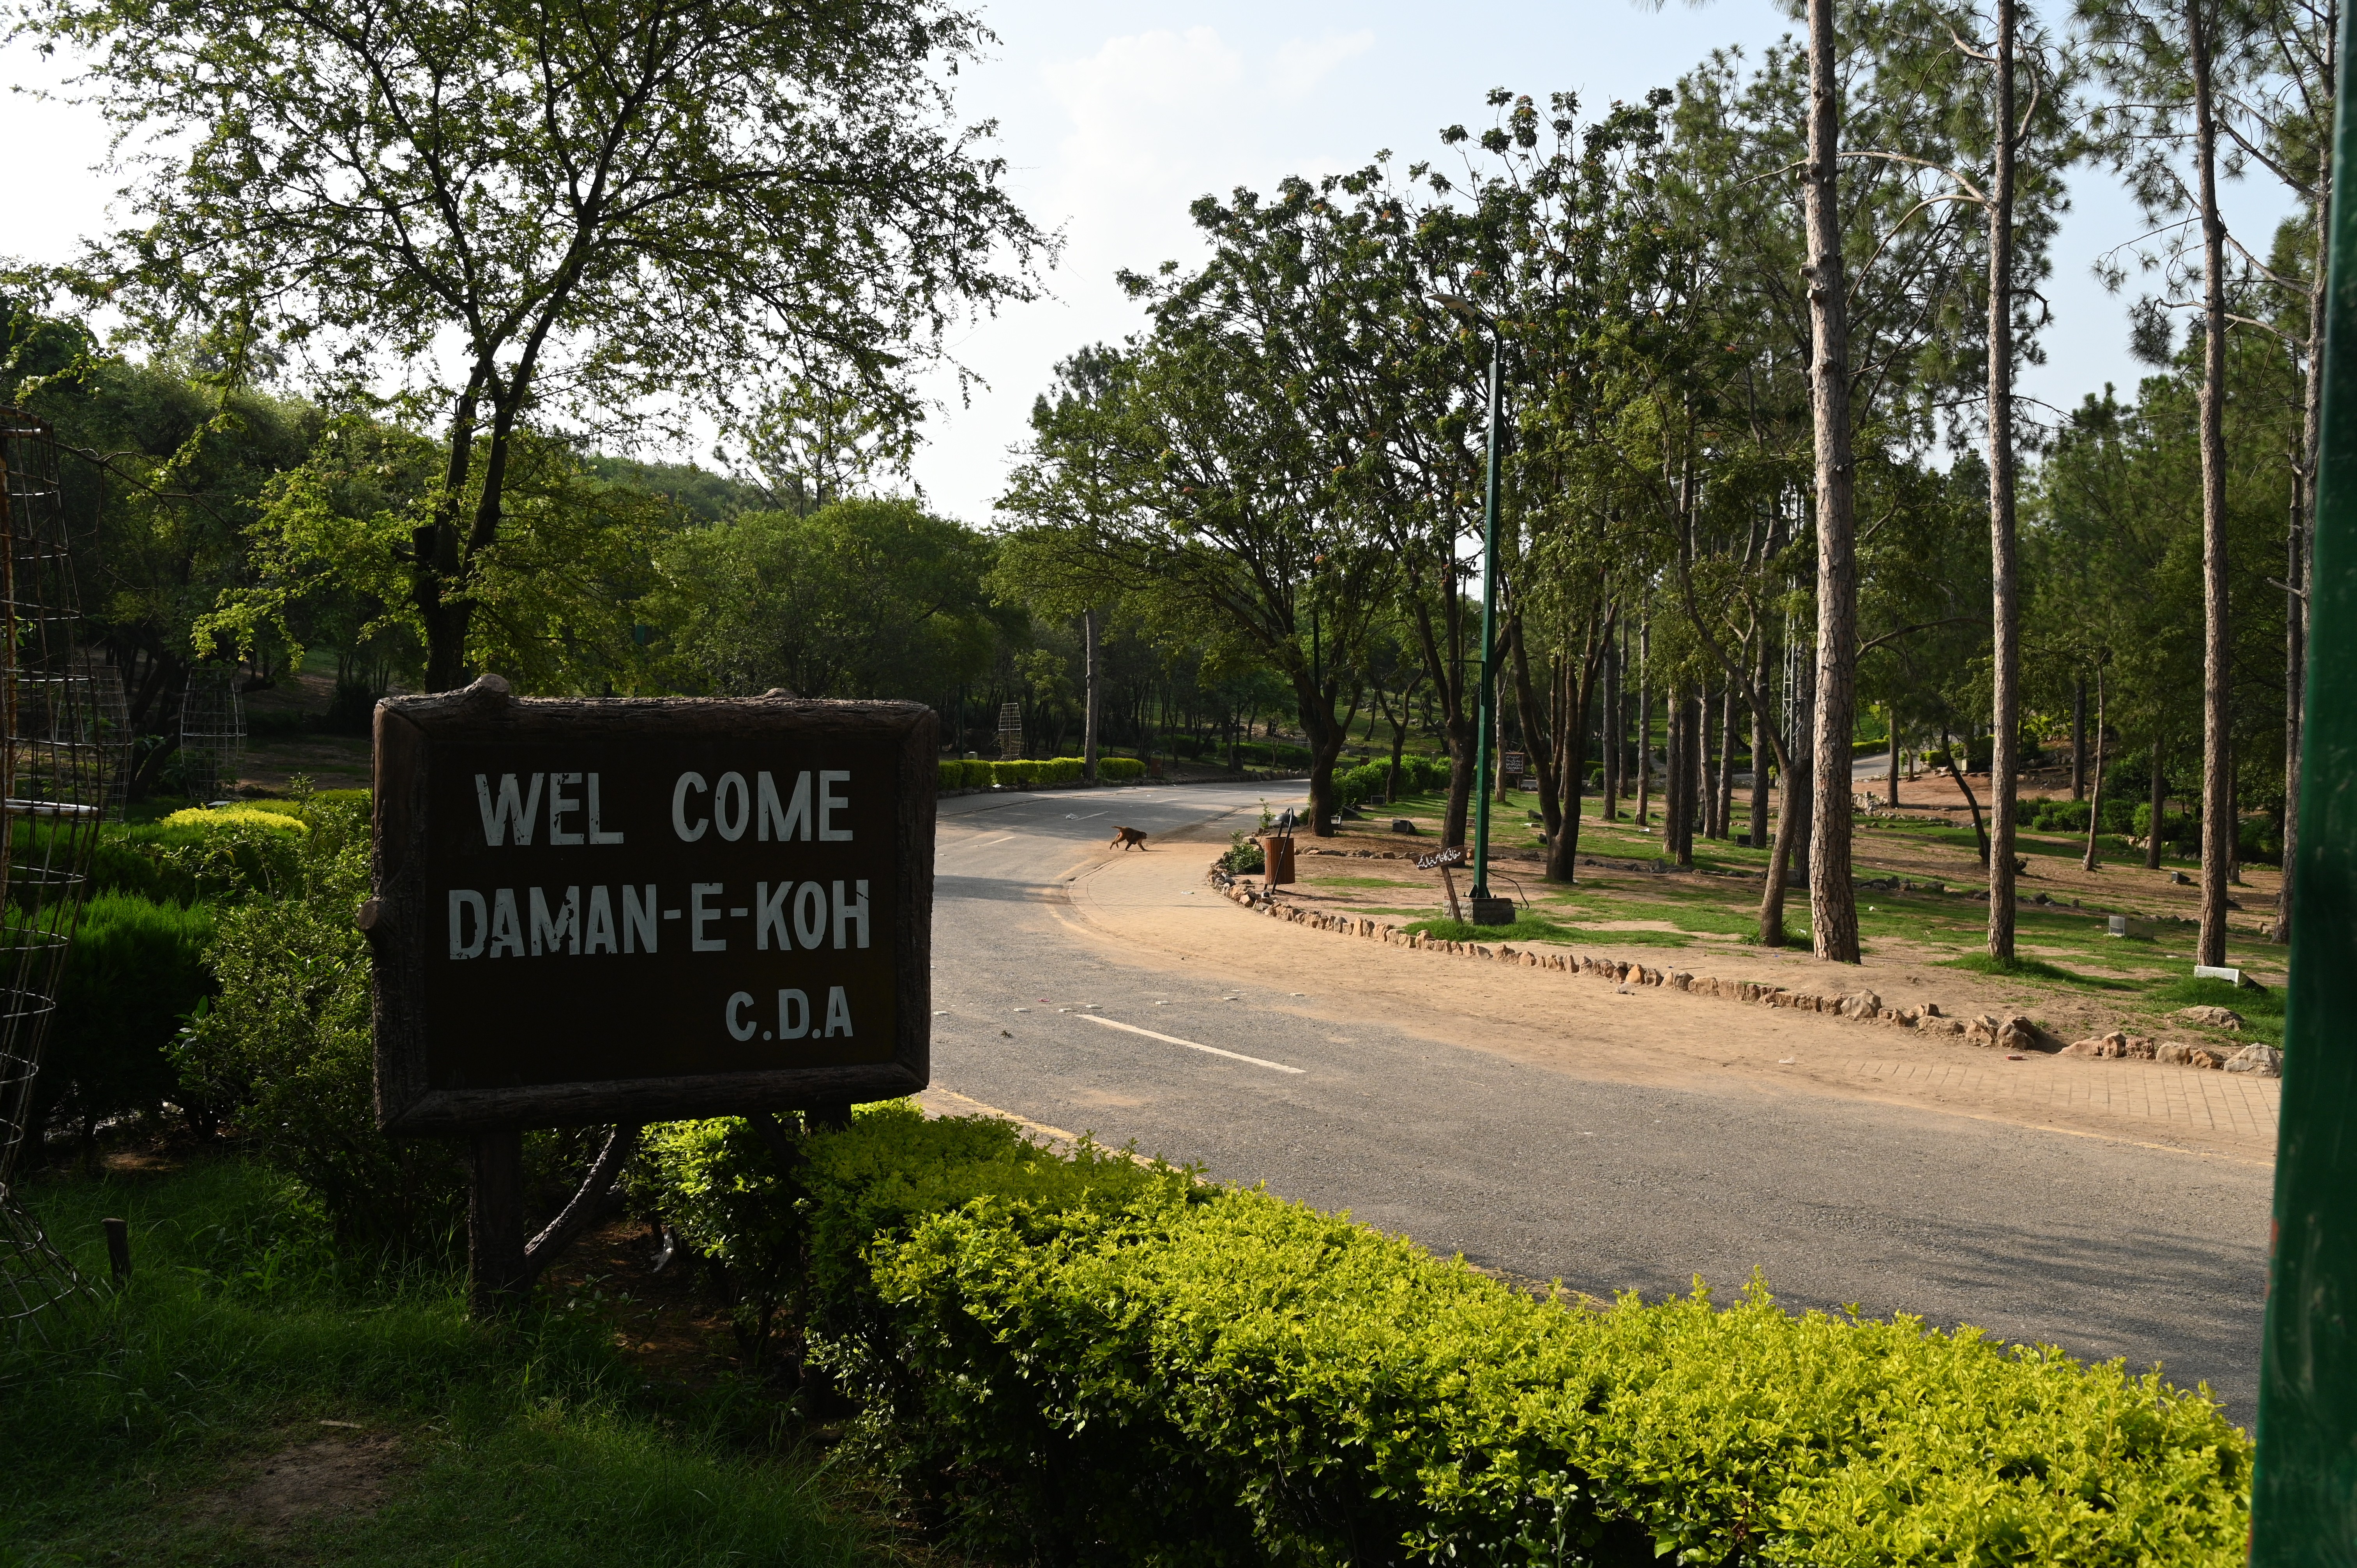 The entrance point of Damn-e-Koh established by CDA